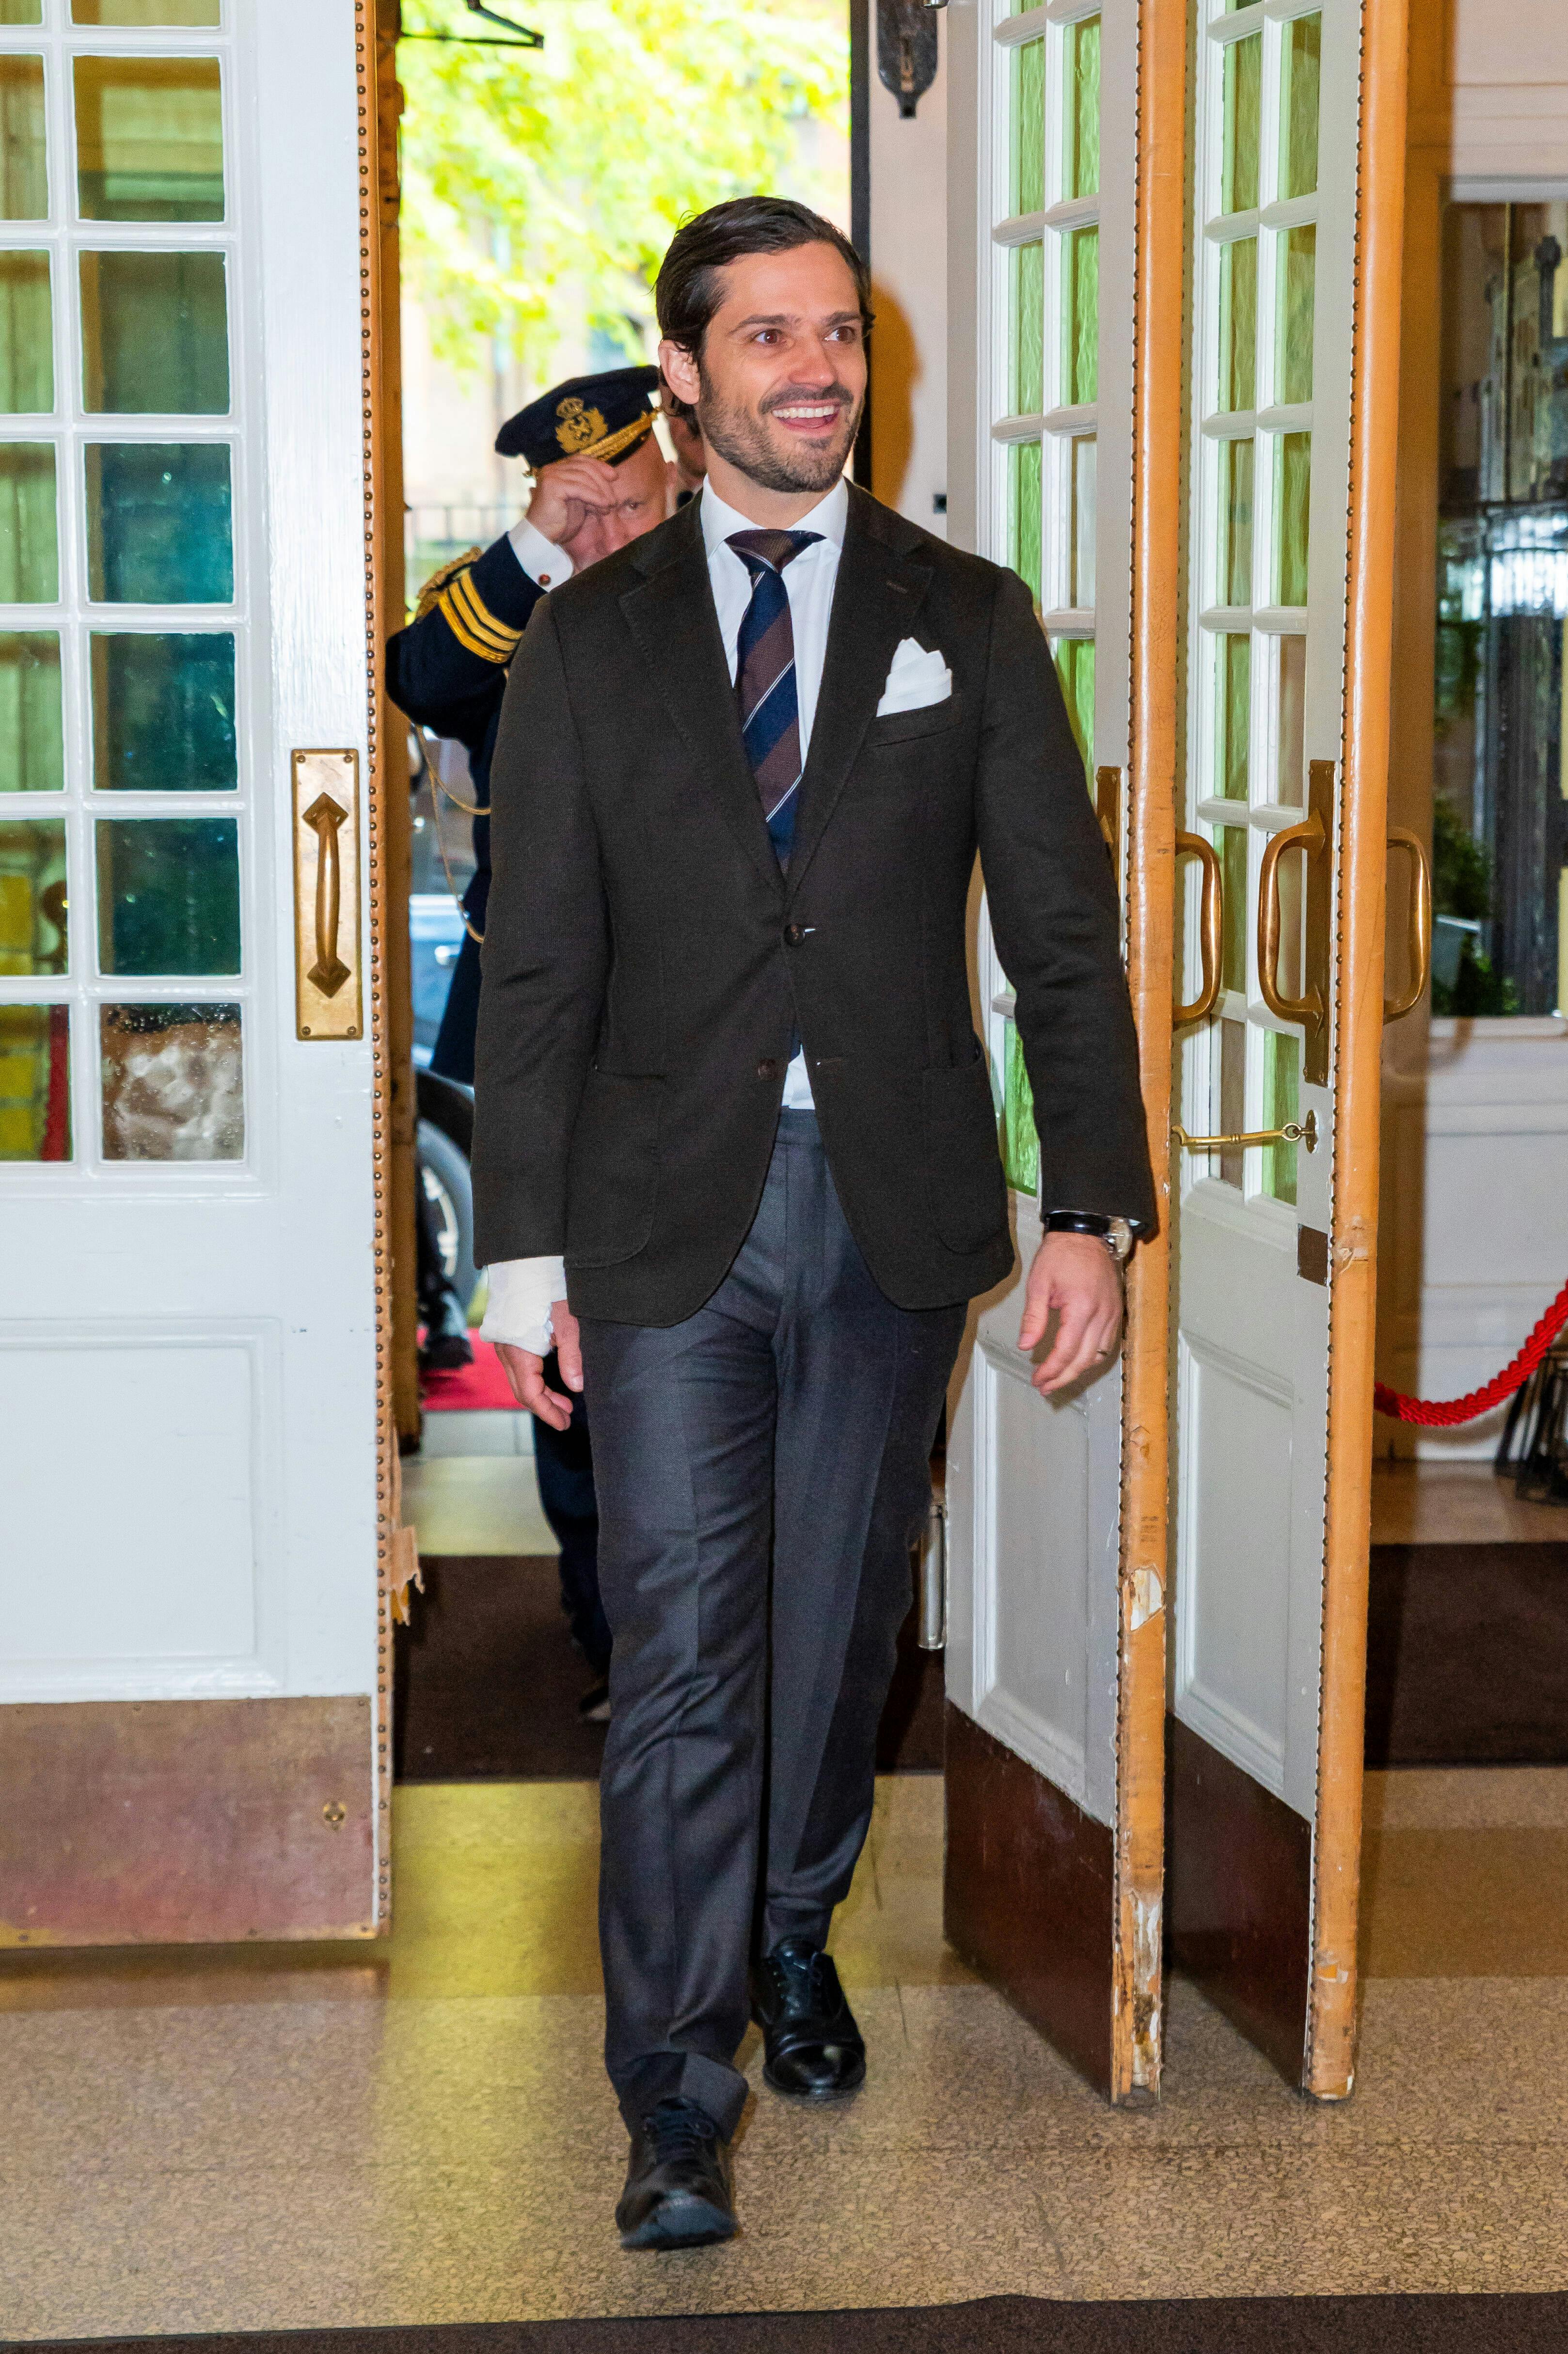 Prince Carl Philip, Awarding of research grants from the Lilla Barnets Fund (German: Foundation for Young Children) in Stockholm, Sweden, October 26, 2023. ( DANA-No: 02477516 )